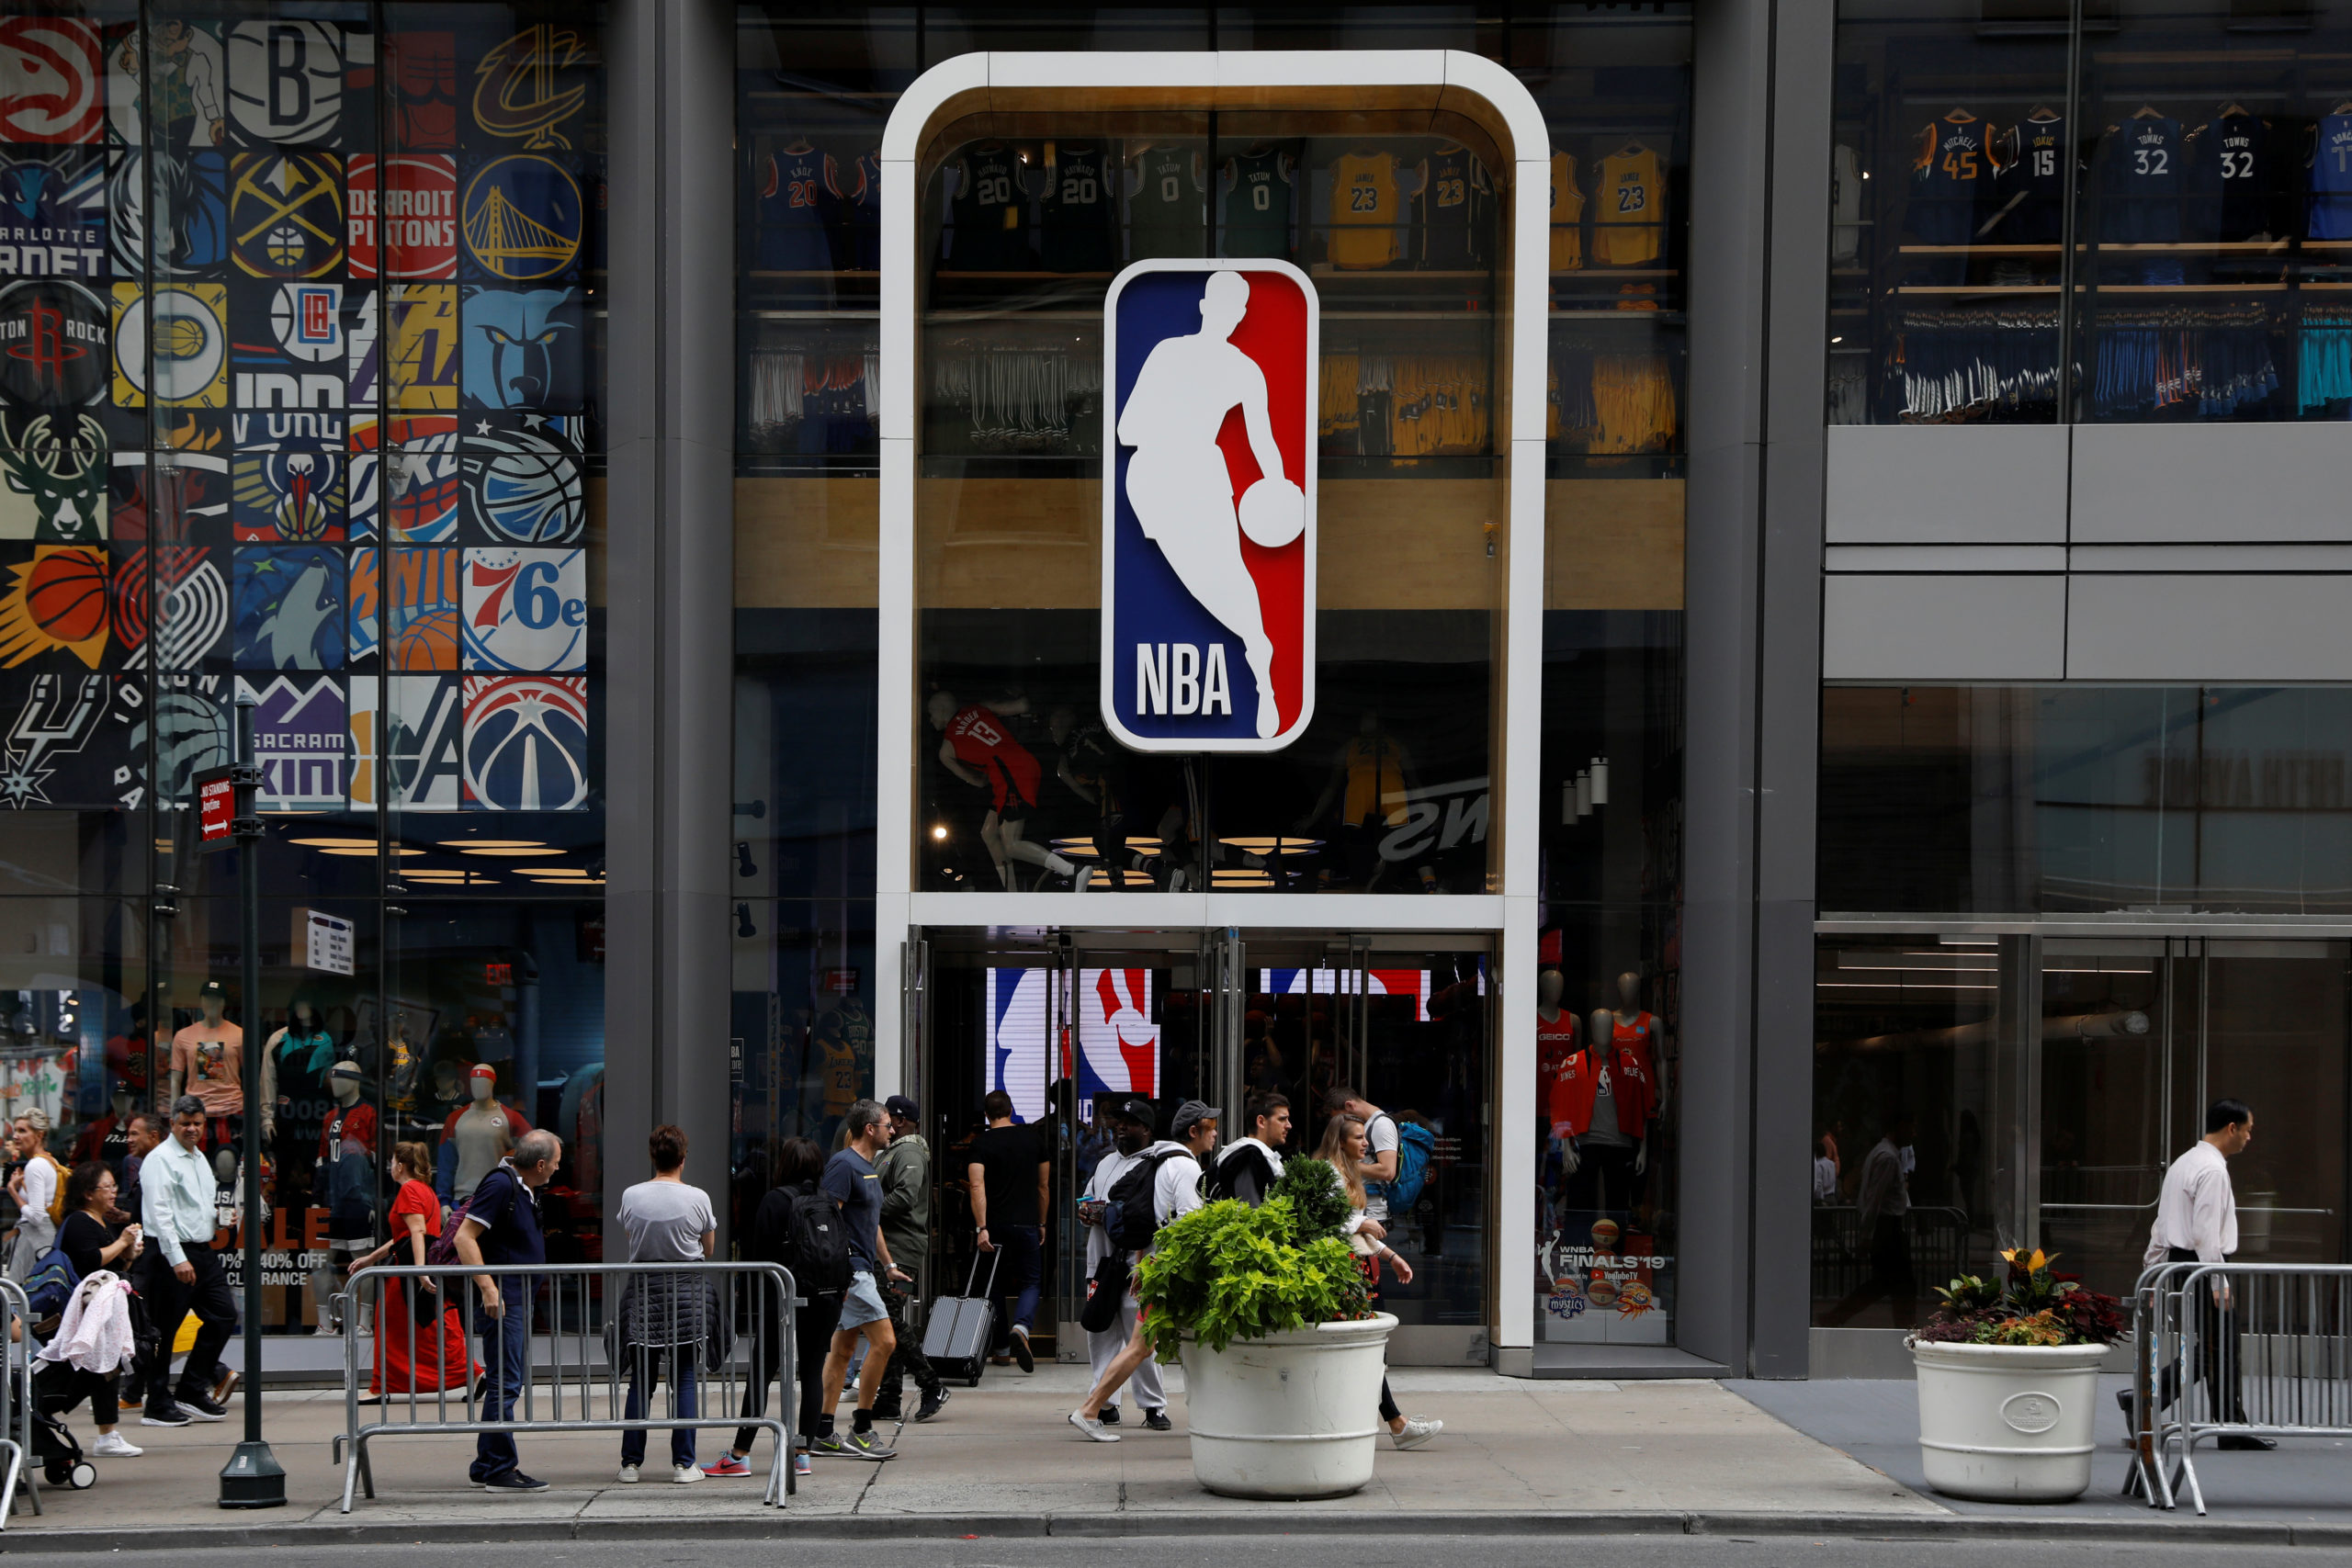 The NBA logo is displayed as people pass by the NBA Store in New York City, U.S., October 7, 2019. REUTERS/Brendan McDermid